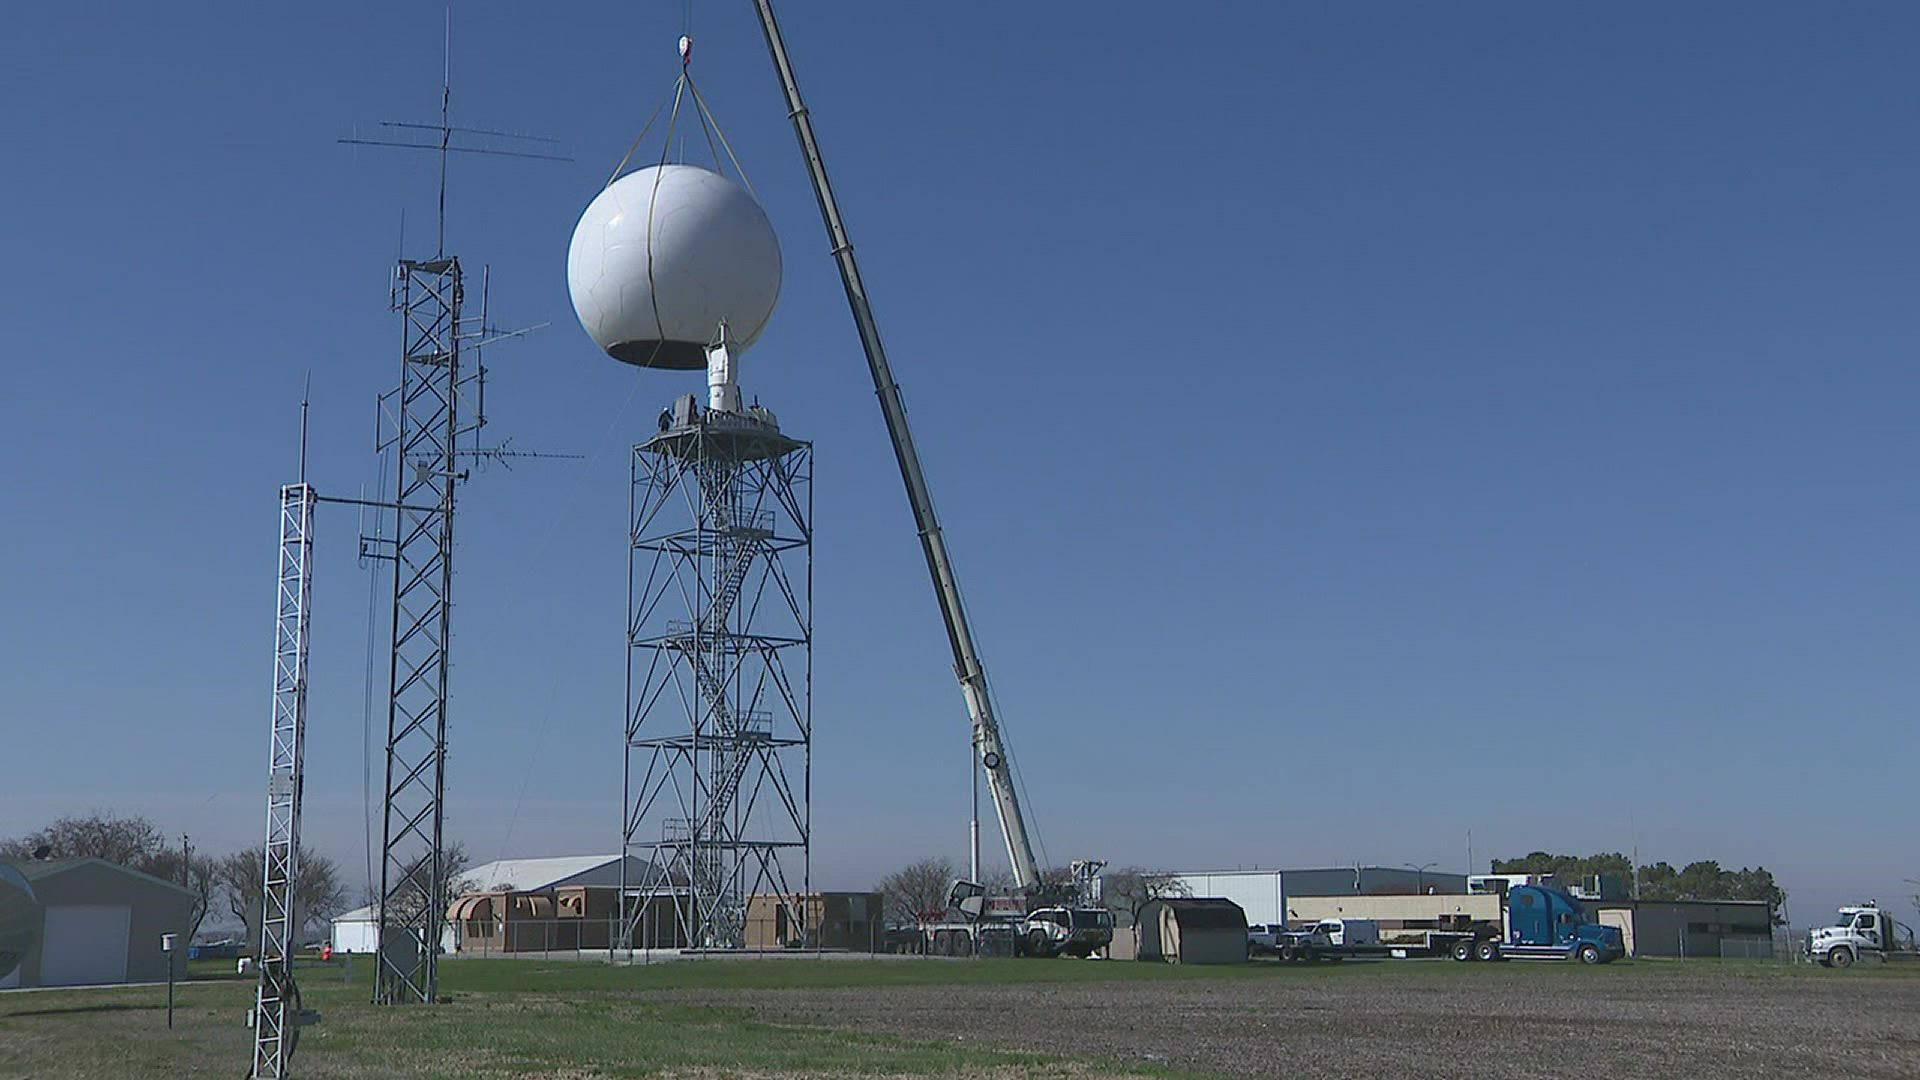 The big golf ball in the sky at the Davenport Municipal Airport, officially known as the KDVN WSR-88D radar, was lifted off the pedestal for upgrades.